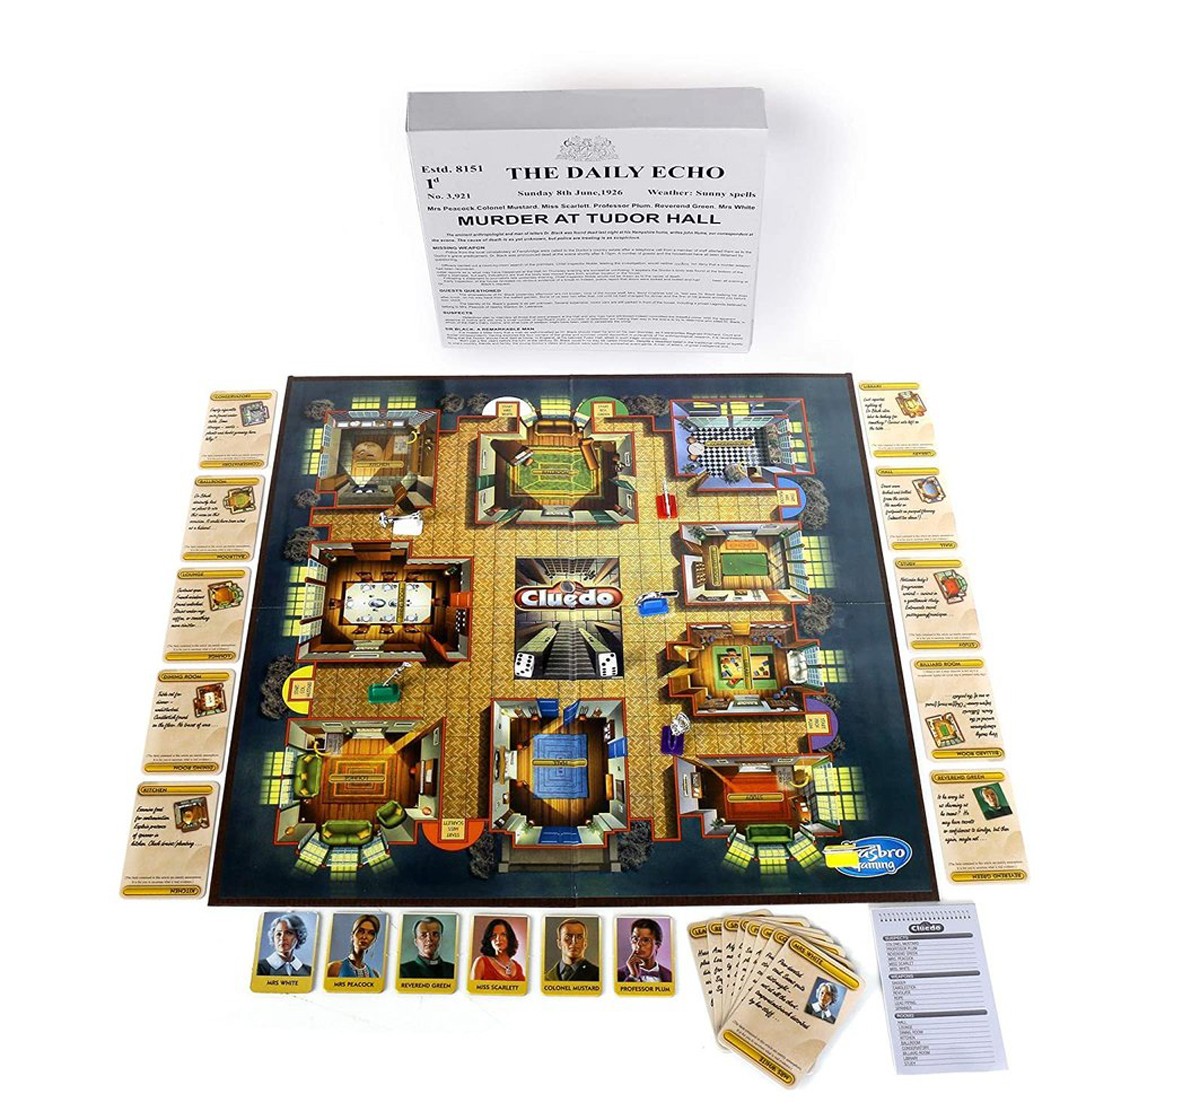 Hasbro Gaming Cluedo The Classic Detective Board Game For kids 7Y+, Multicolour